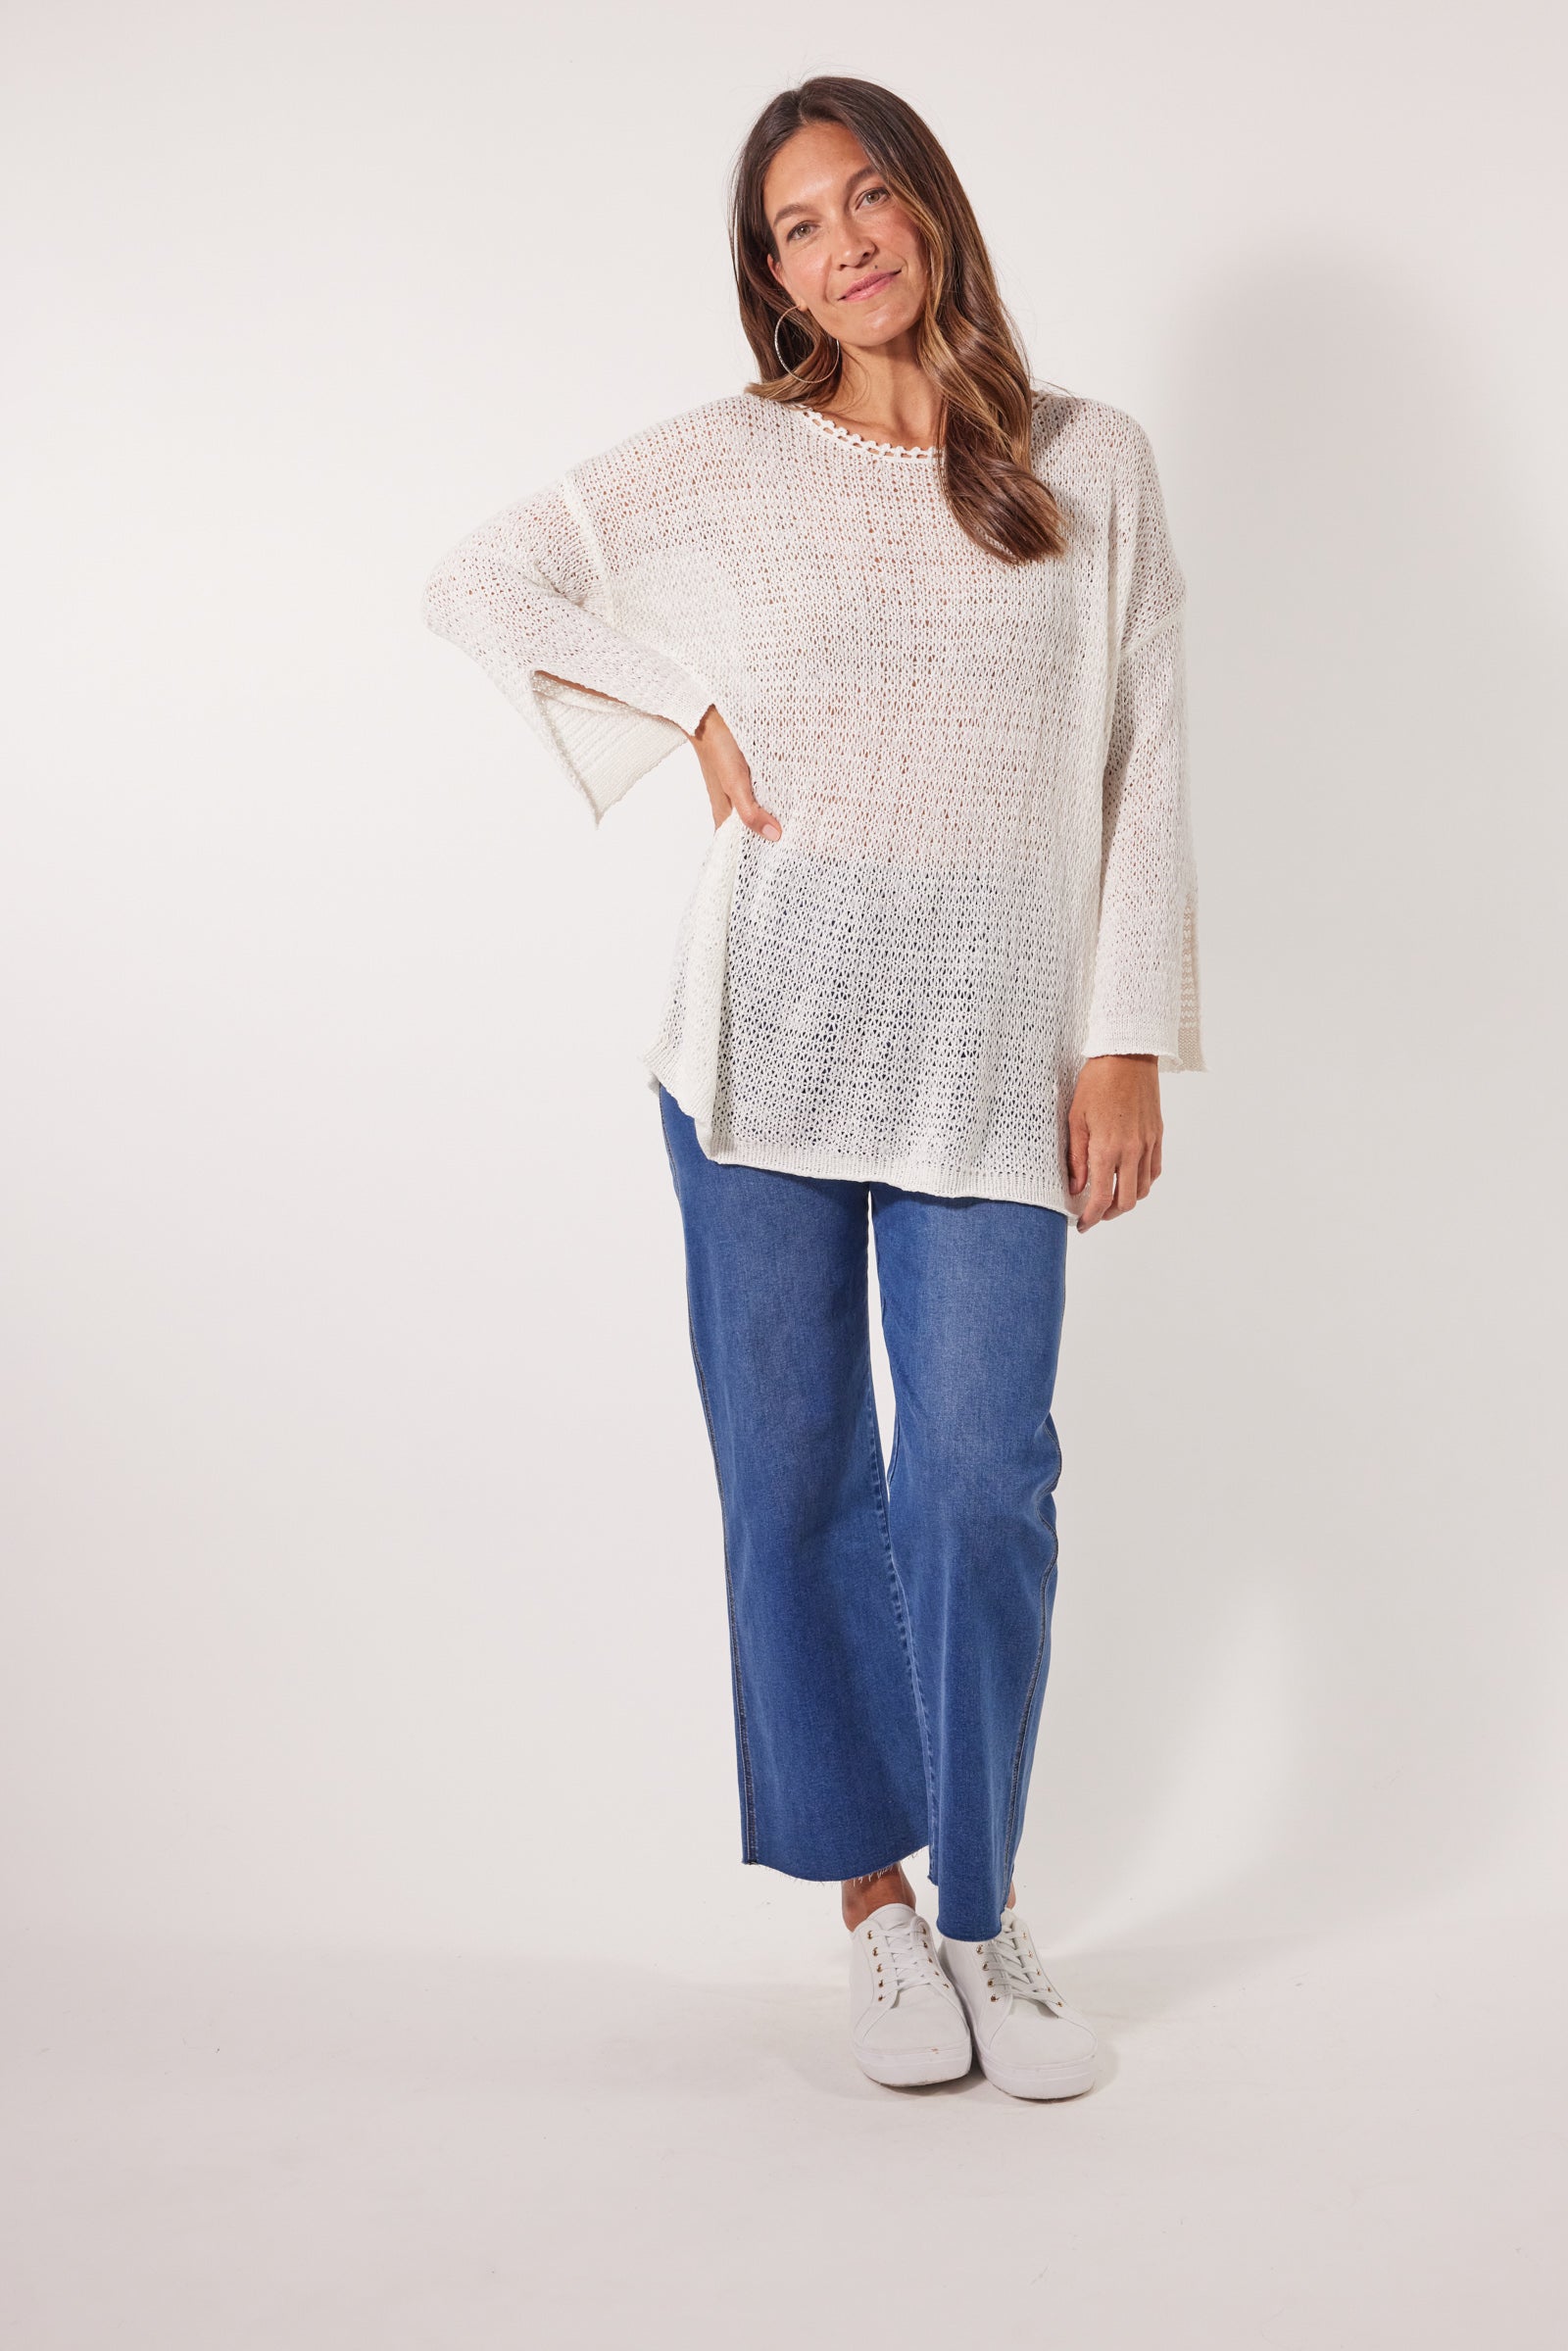 Marquee Jumper - Lotus - Isle of Mine Clothing - Knit Jumper One Size